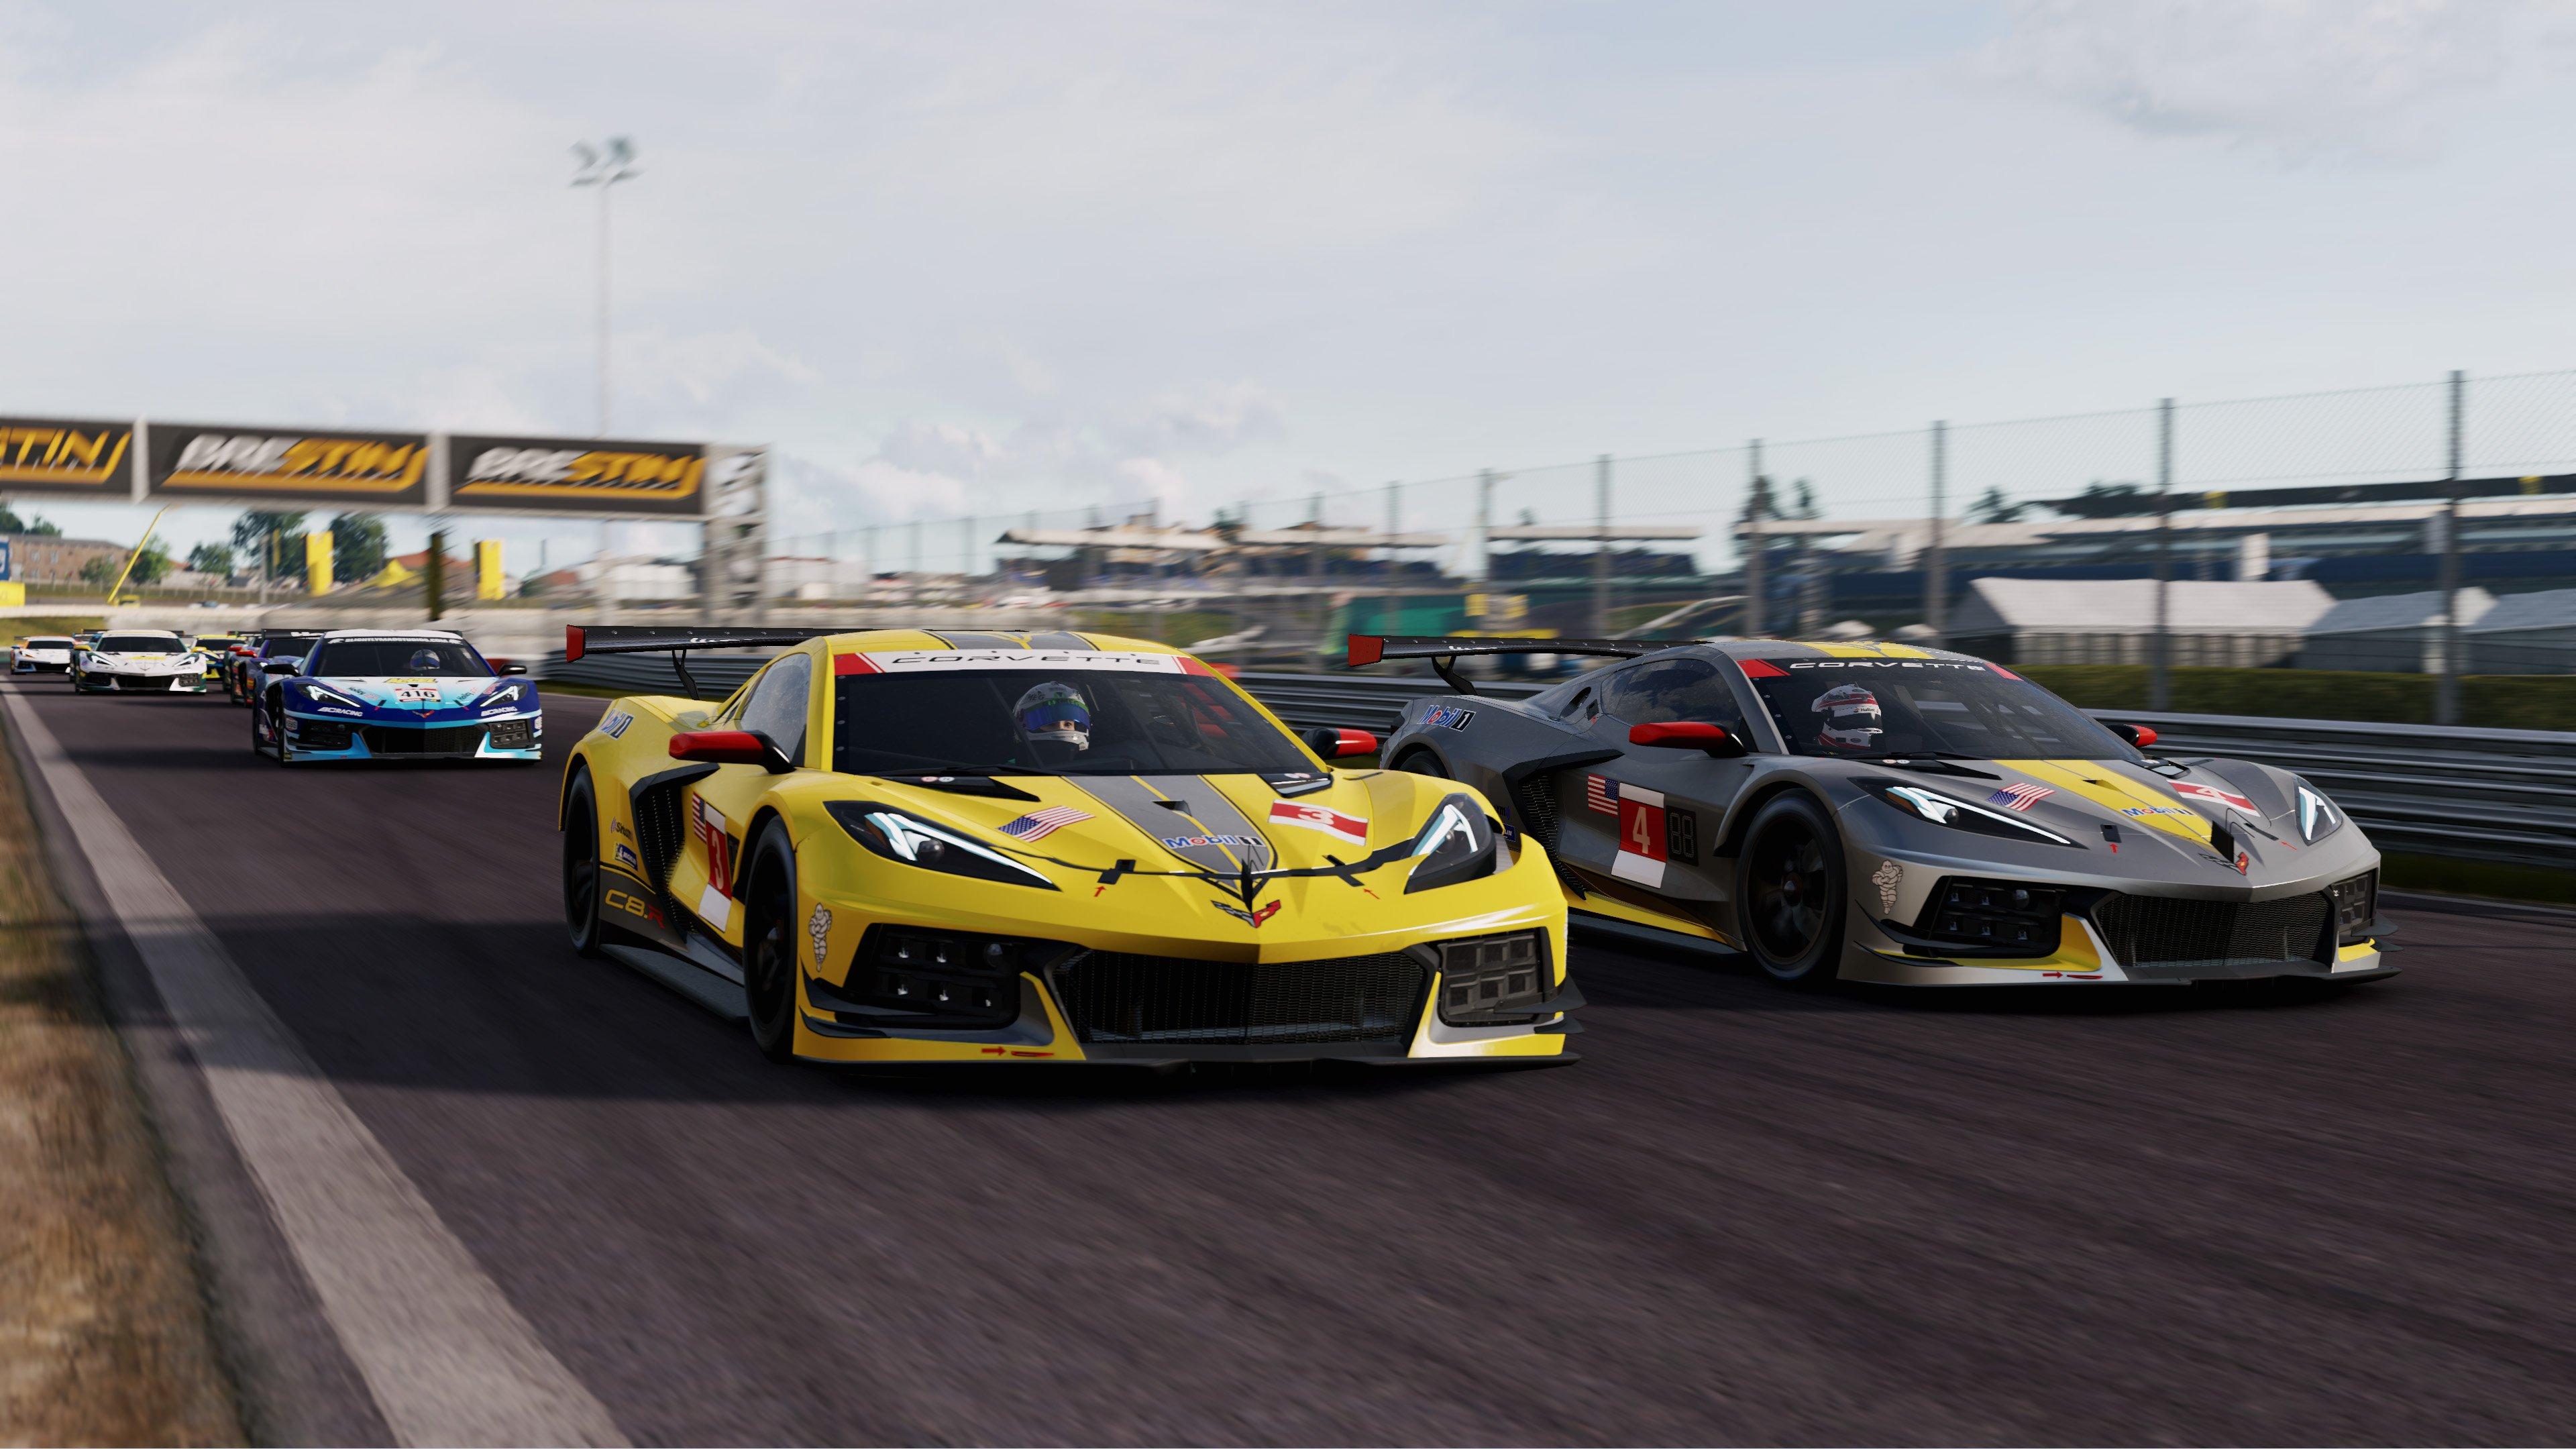 Project CARS 3 for Xbox One, Xbox Series X